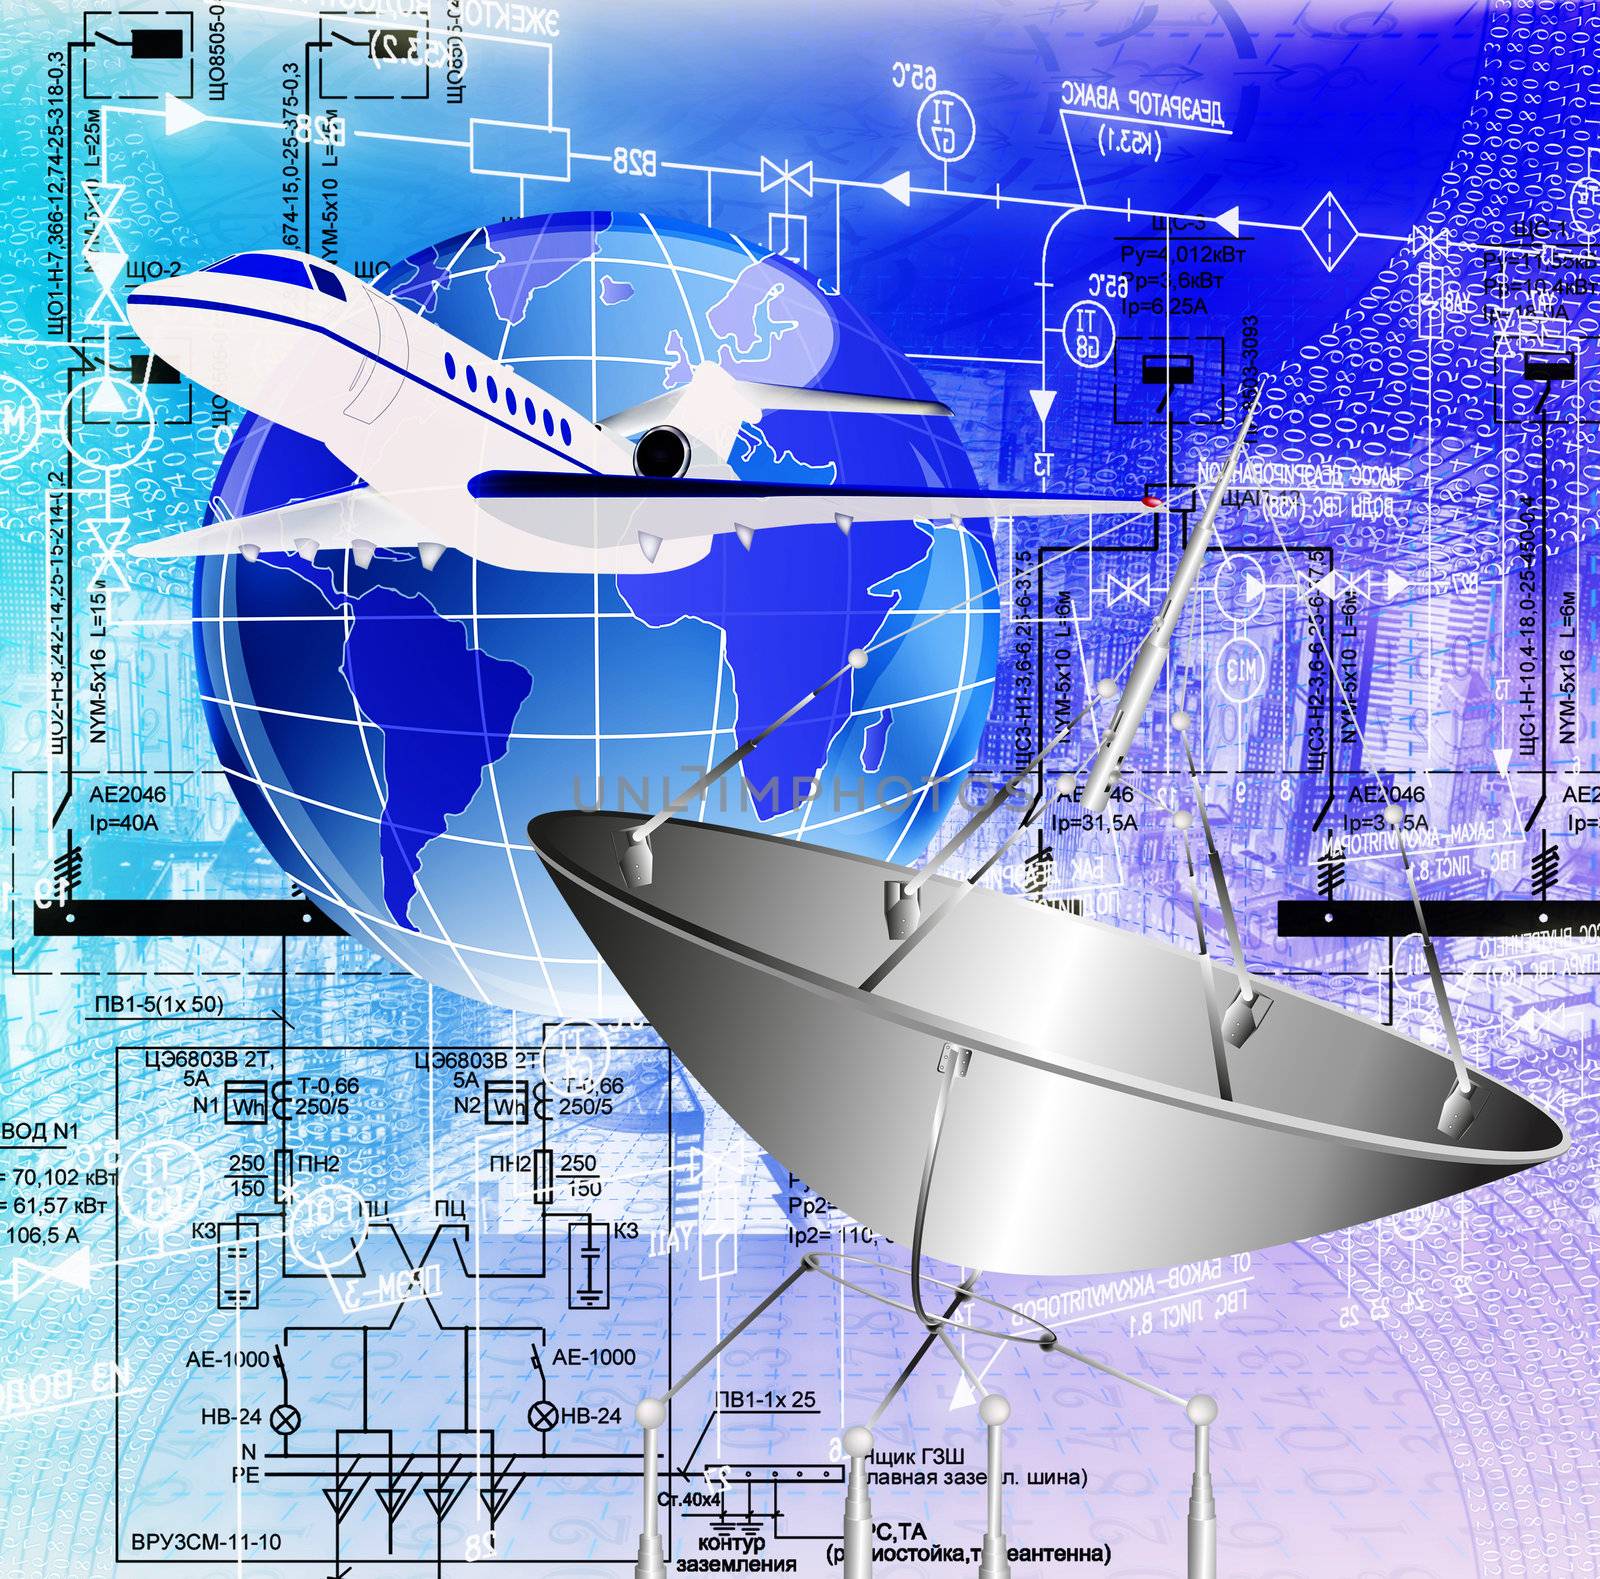 Innovative systems of navigating safety of air transport